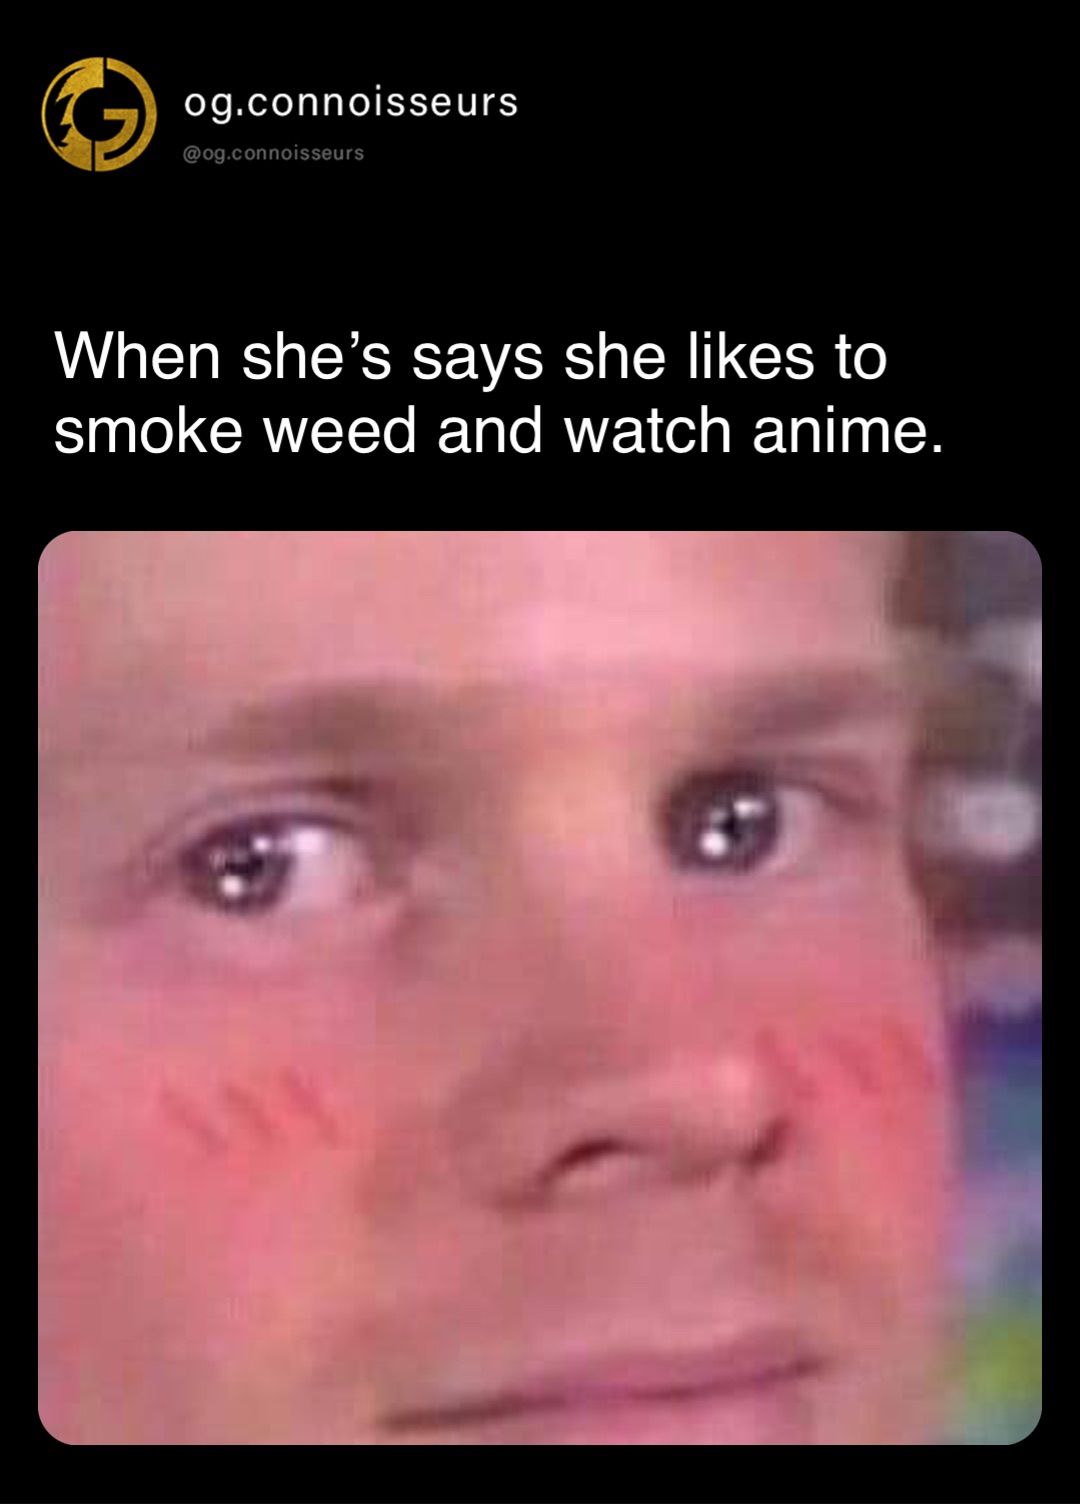 When she’s says she likes to smoke weed and watch anime.